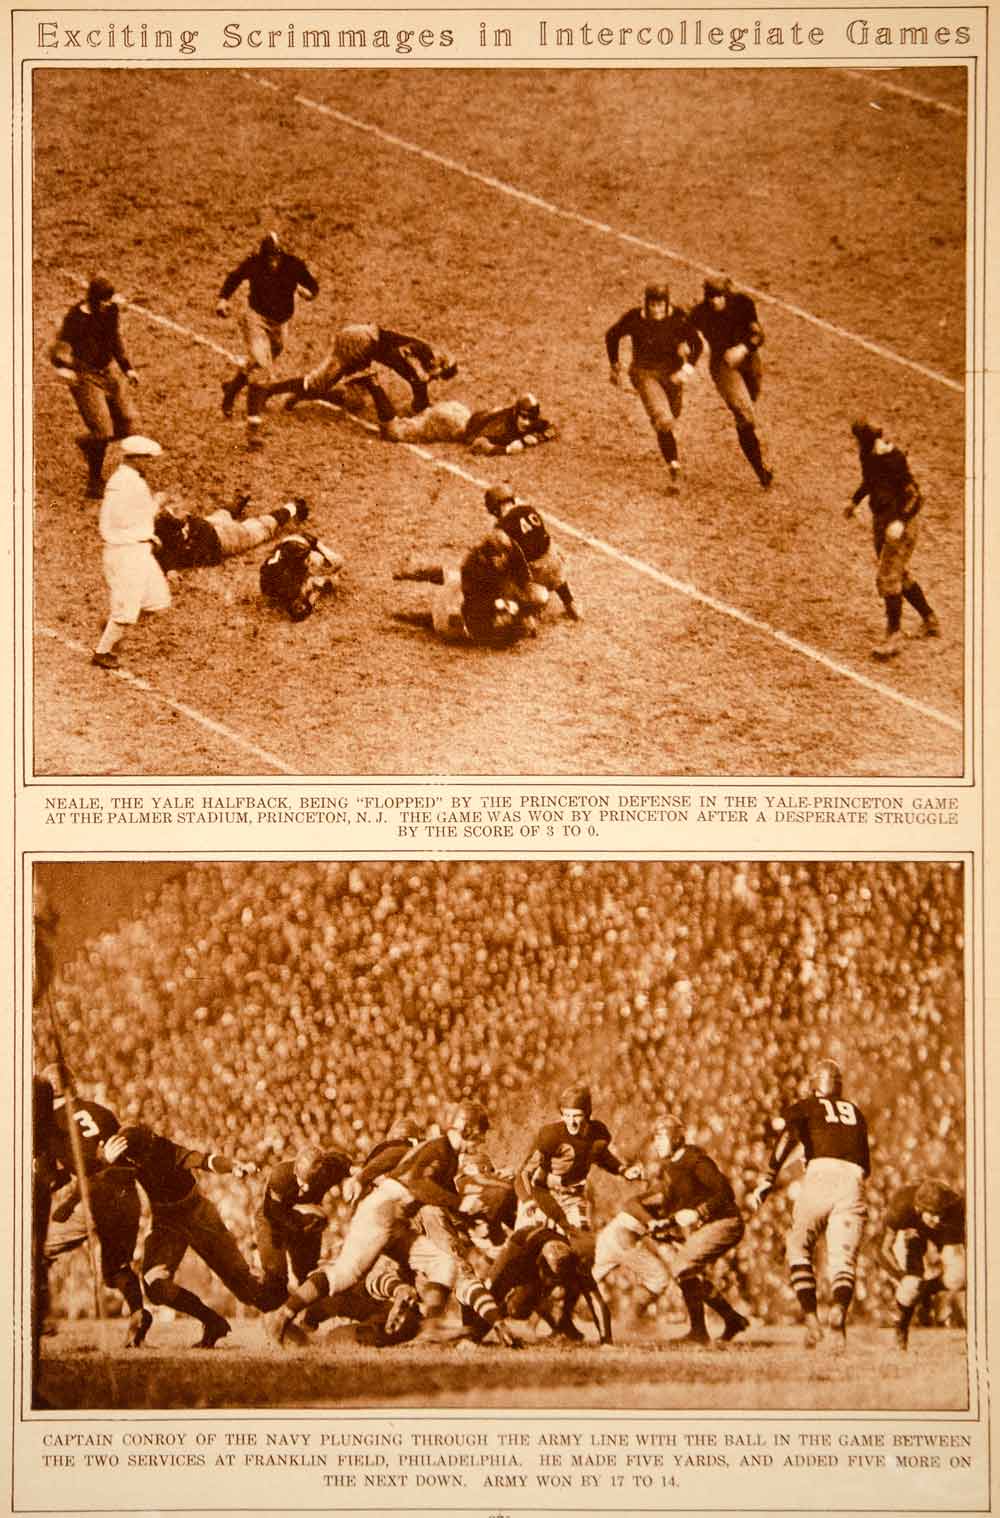 1923 Rotogravure Vintage Football Game Scrimmage Yale-Princeton Army-Navy Sport